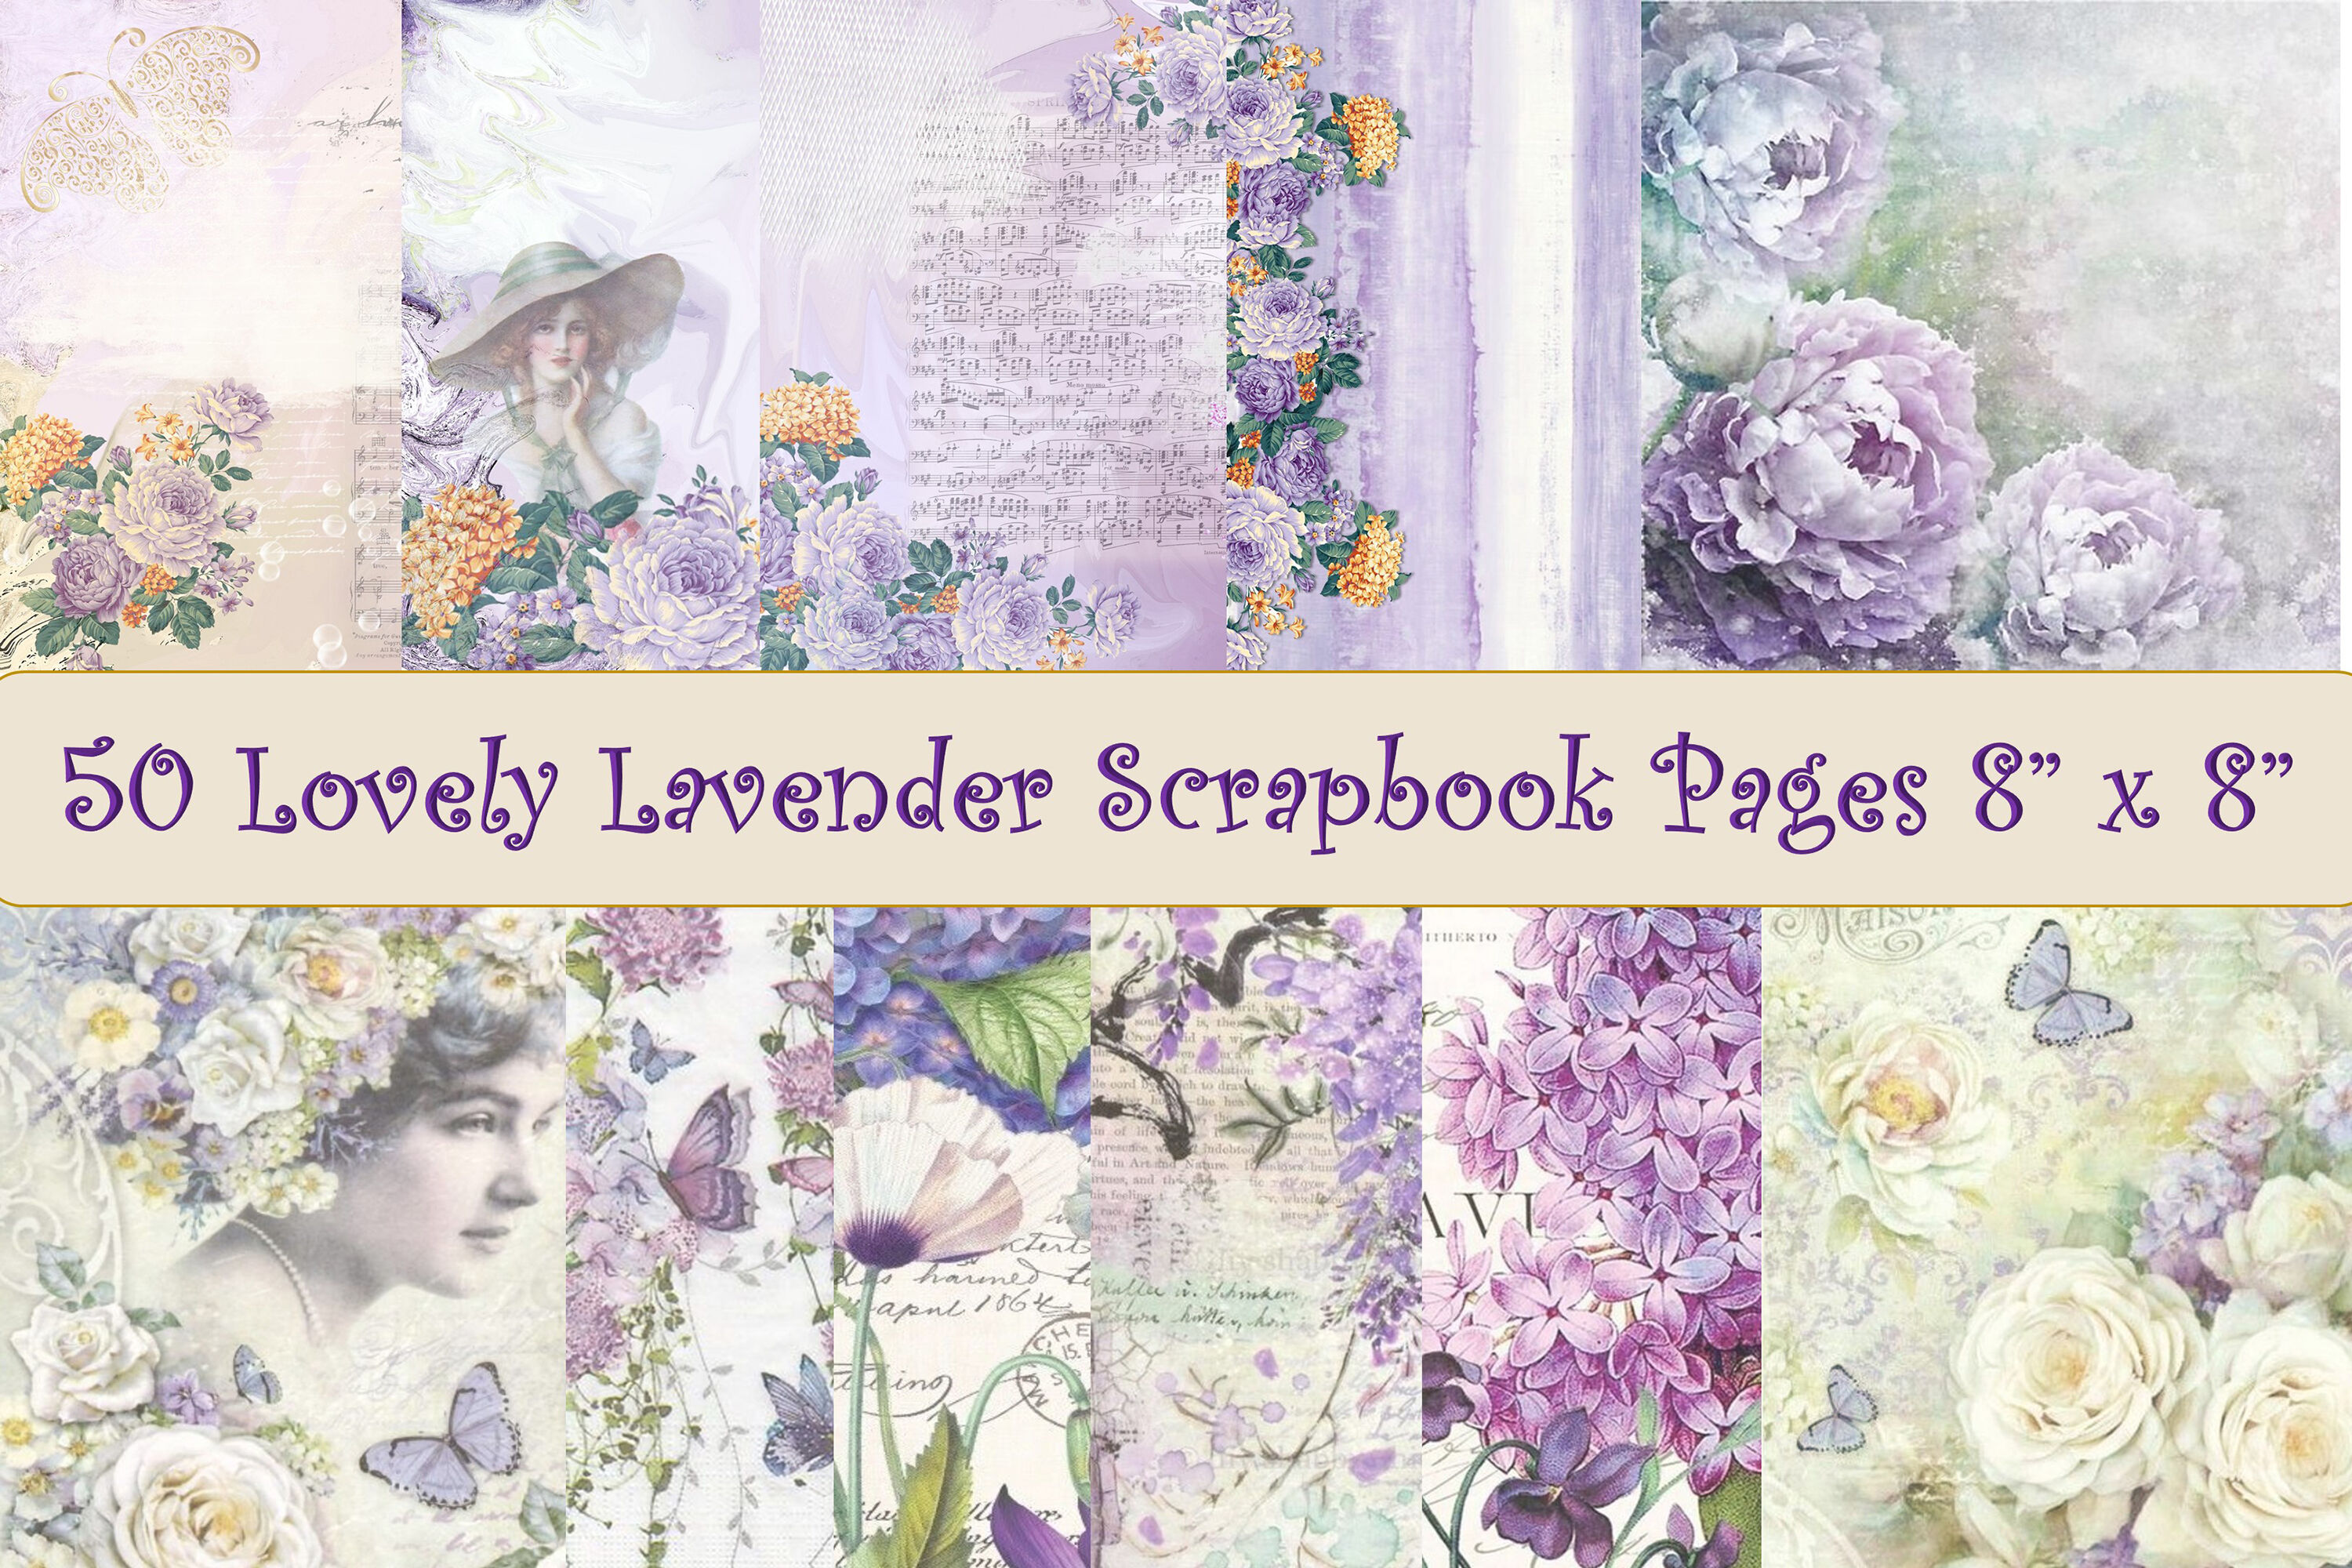 LILAC BOUQUET: Lilac and lavender scrapbook paper | Romantic garden  collection with purple flowers | Creative crafts papers for scrapbooking,  DIYT